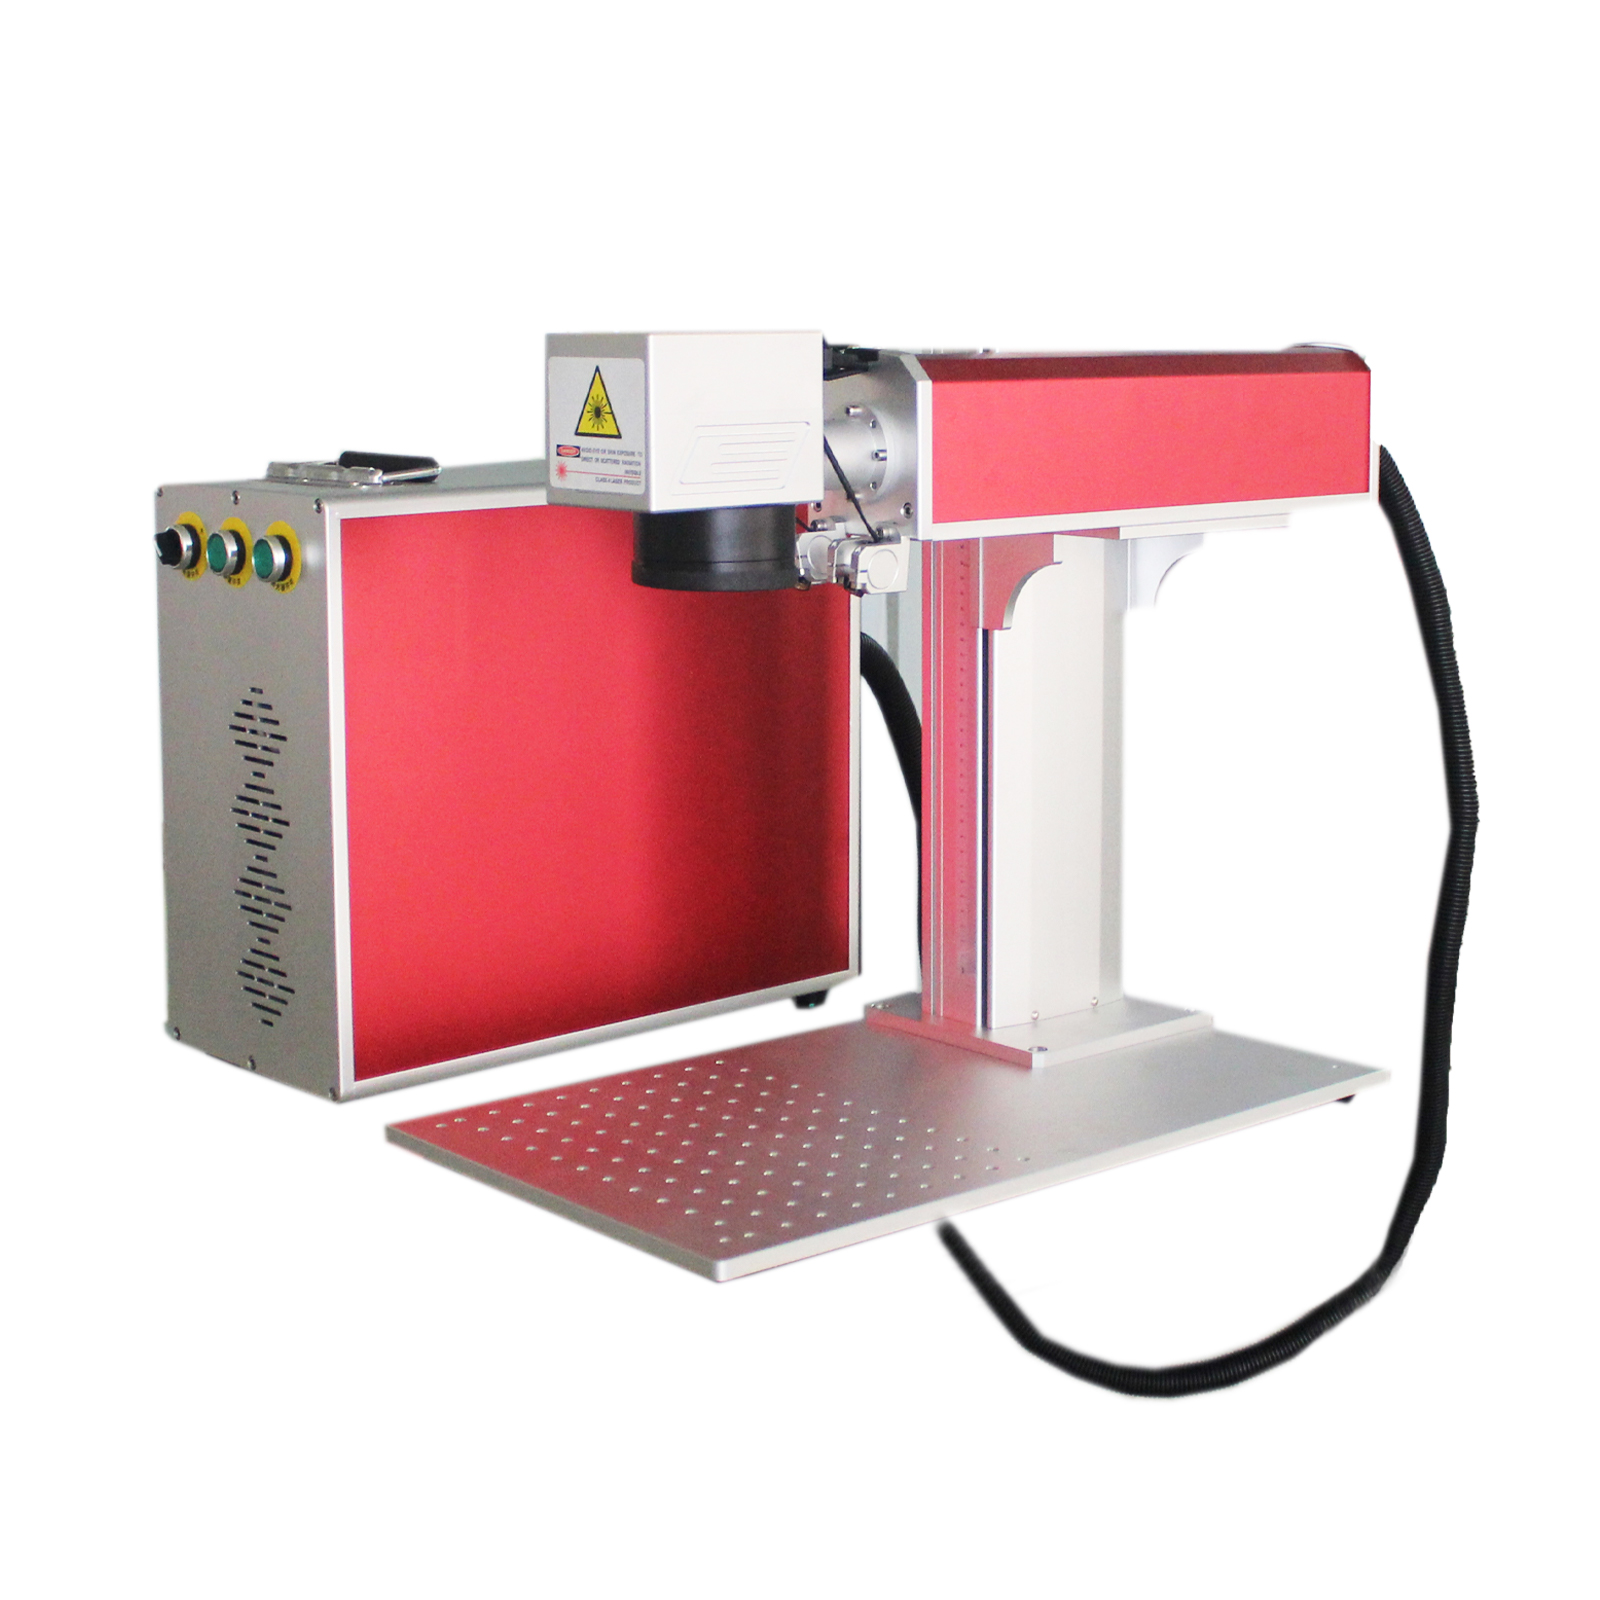 60W MOPA Fiber Laser Marking Machine for Metal Color Marking, with Red Dot Pointer, Rotation Axis, EzCad2, Compatible LightBurn